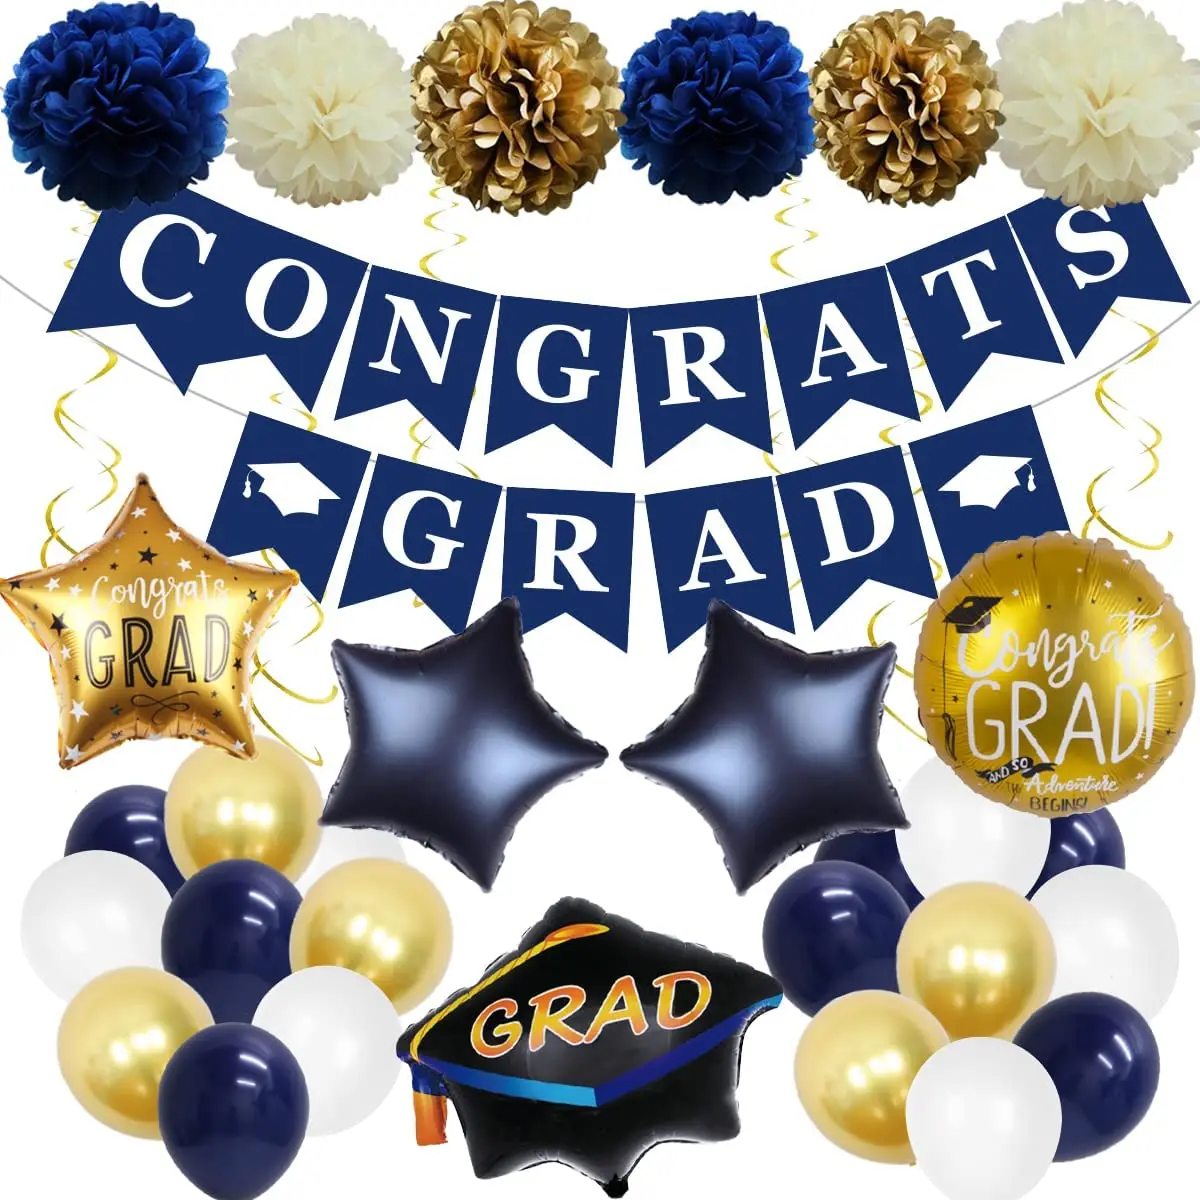 

Graduation Decorations for Class of 2023, Congrats Grad Banner, Pom Poms Hat, Balloons for Class of 2023, Navy Blue and Gold